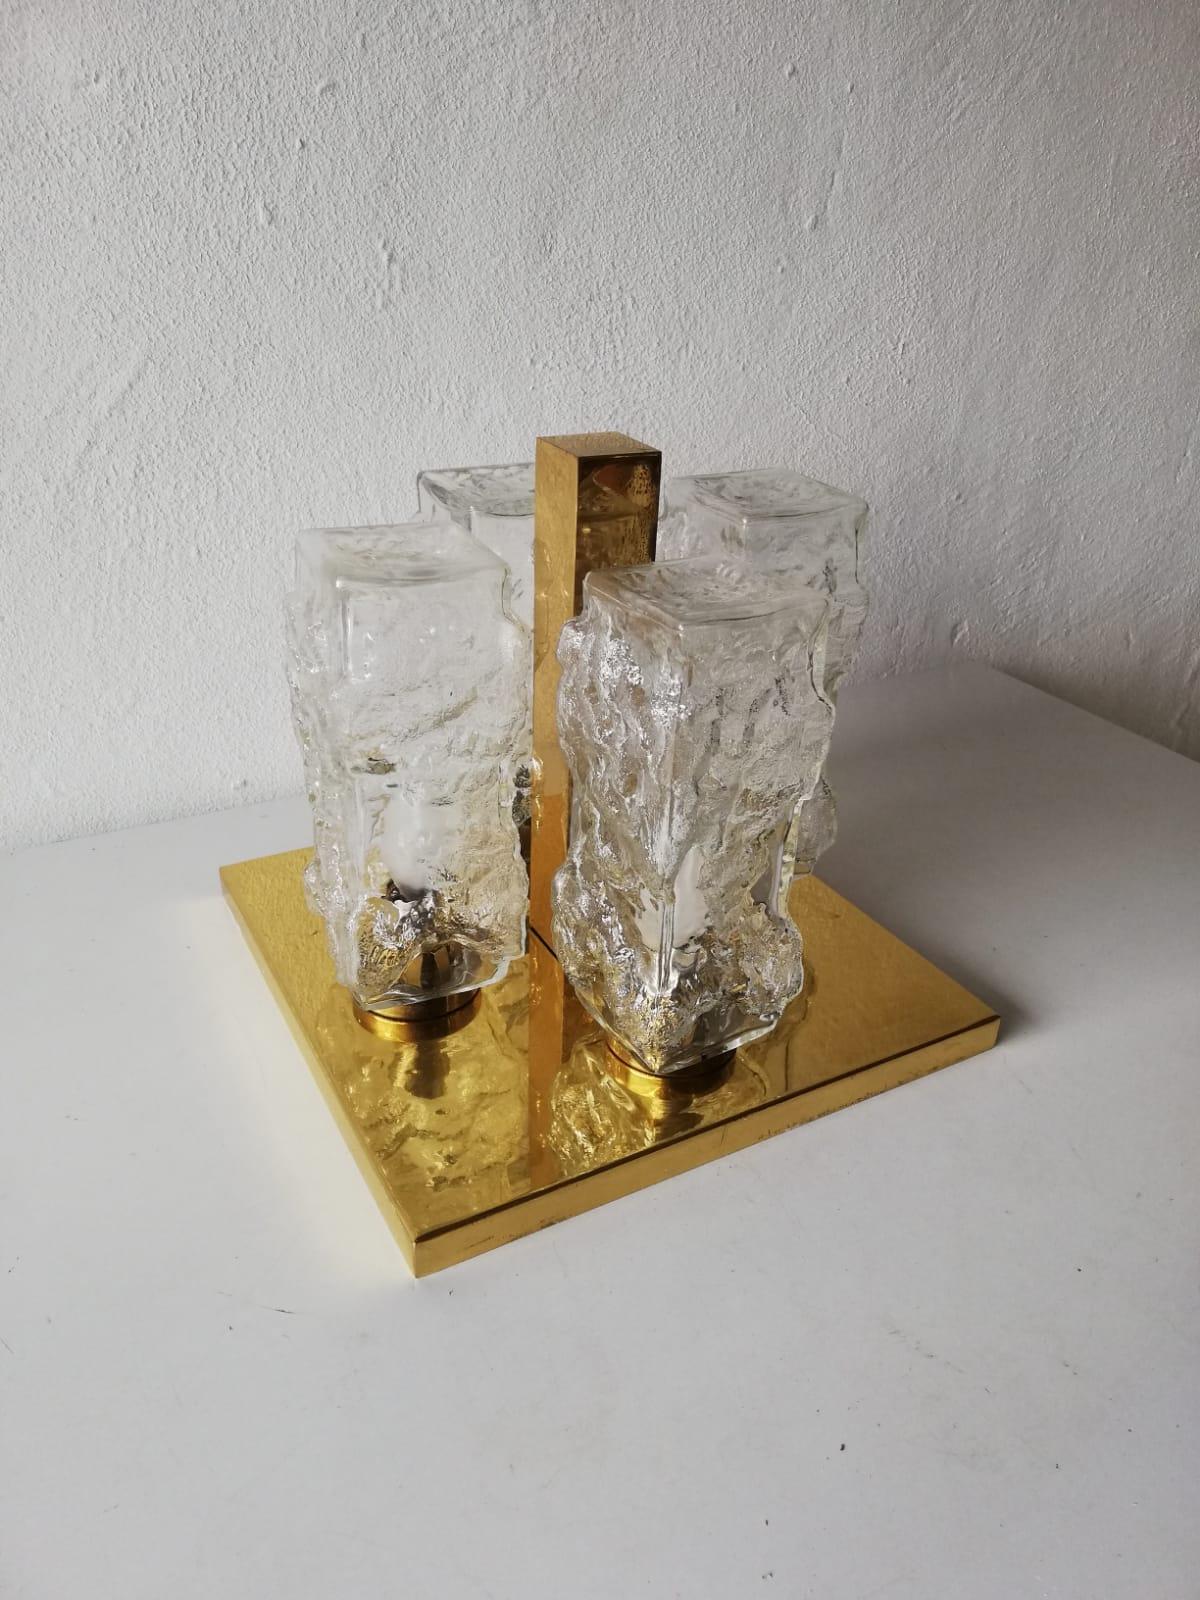 Ice glass & brass flush mount or ceiling lamp by Hillebrand, 1960s Germany

Very elegant 4 Head ceiling lamp. 

It is very ideal and suitable for all living areas.


Lamp is in good condition. No damage, no crack.
Wear consistent with age